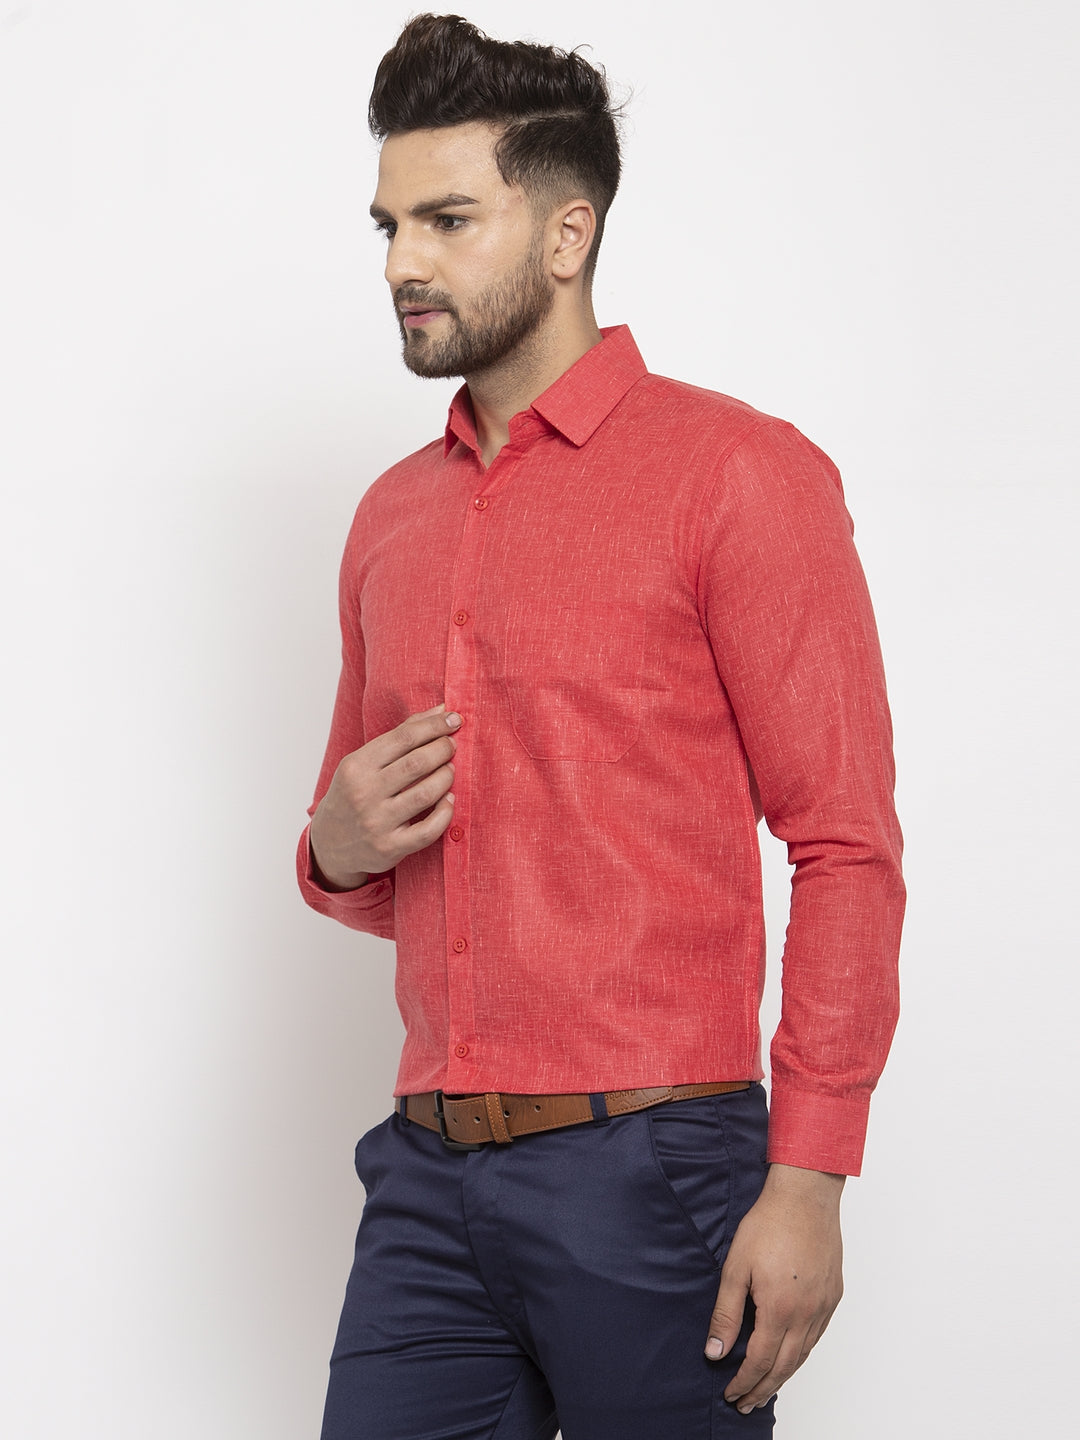 Men's Red Dobby Solid Formal Shirts ( SF 762Red ) - Jainish